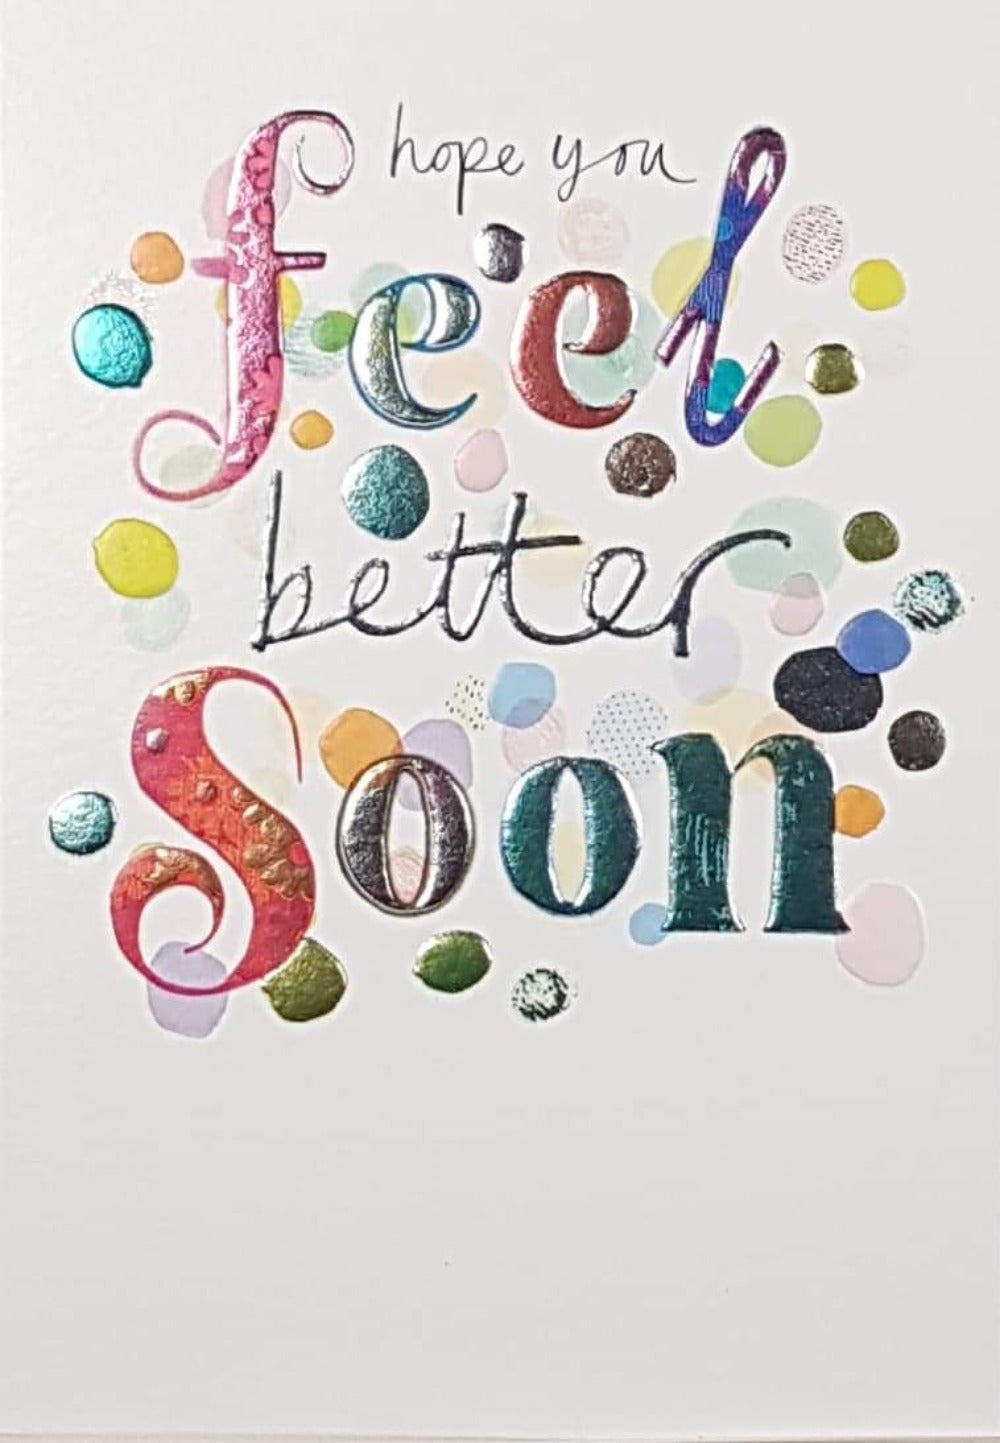 Get Well Card - 'Hope You Feel Better Soon' & Colorful Spots